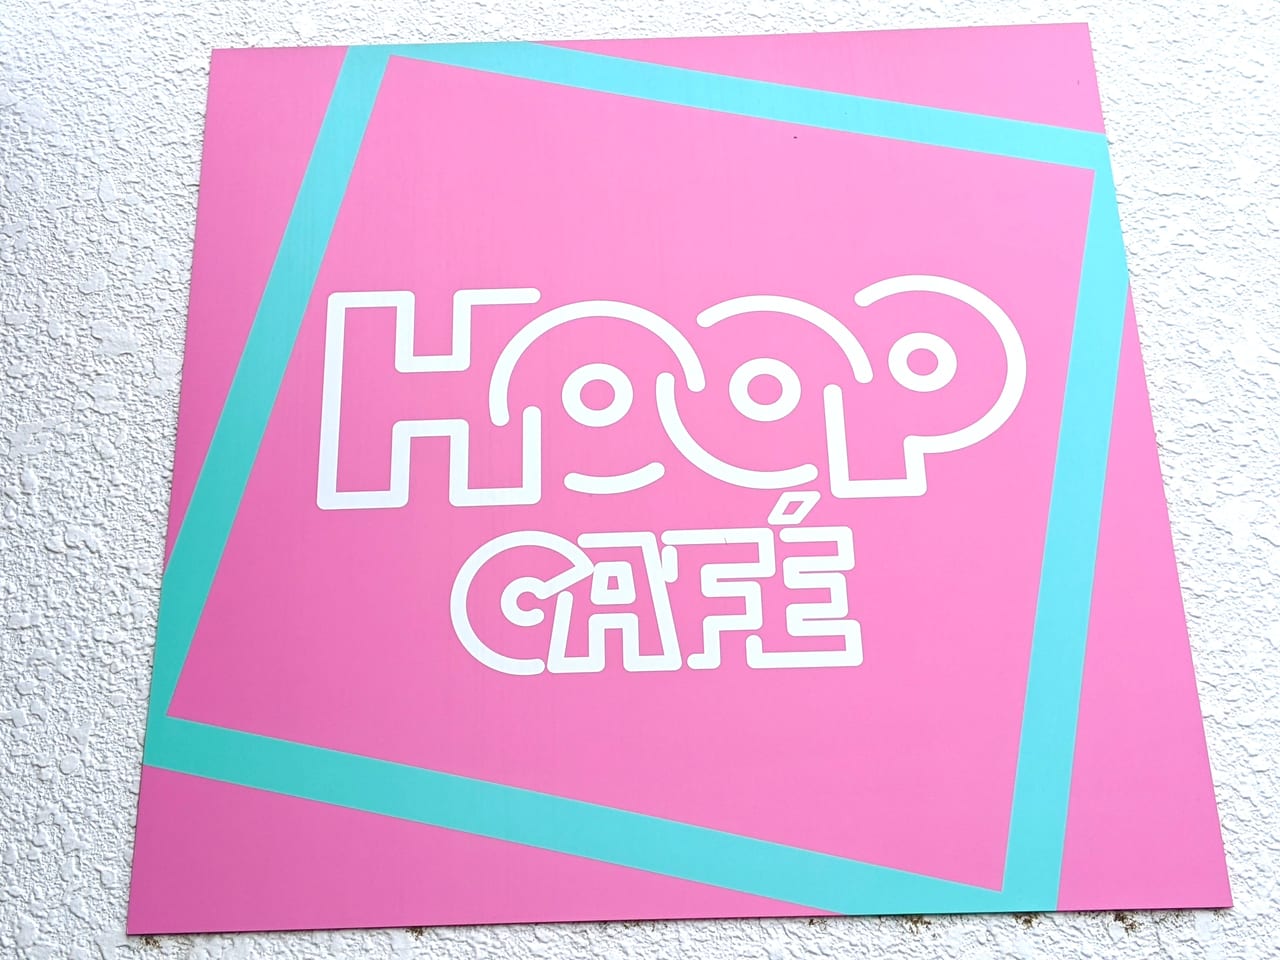 「HOOP CAFE」のロゴ